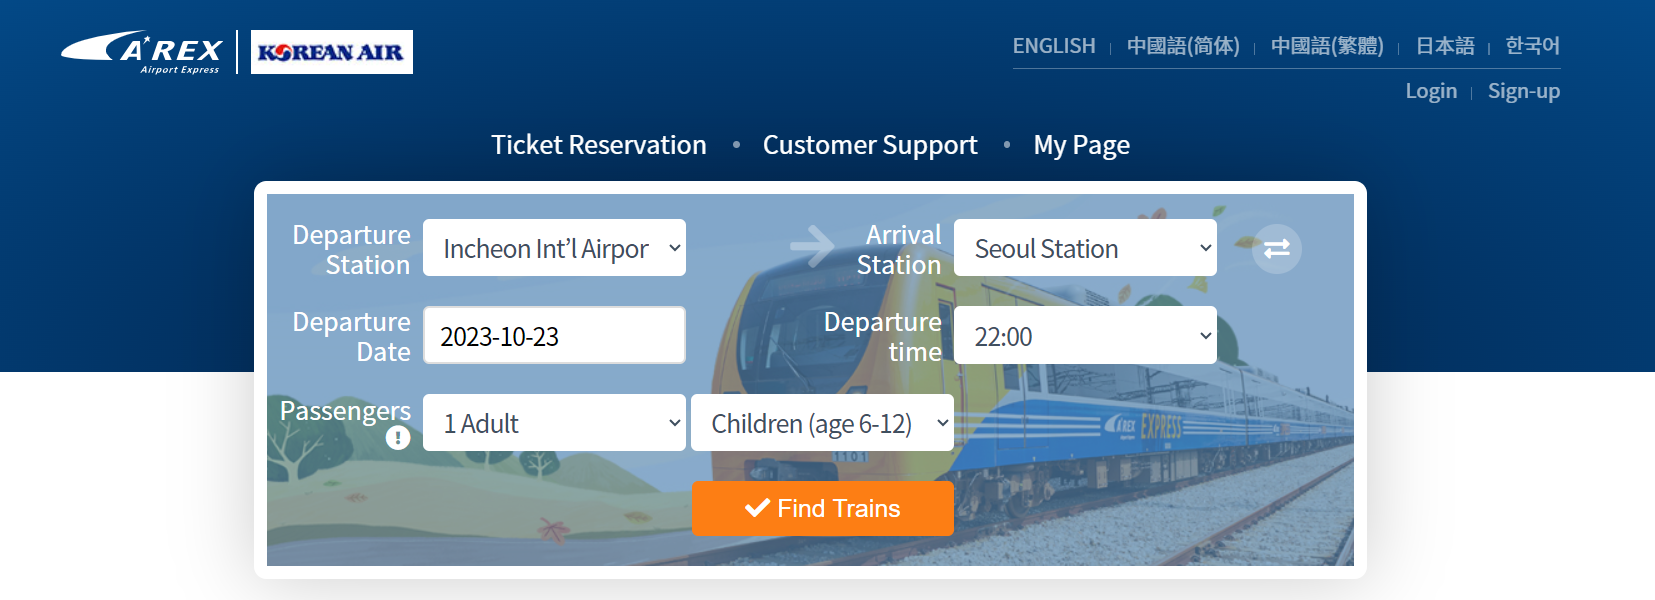 How to reserve an Express Airport Railroad in Seoul